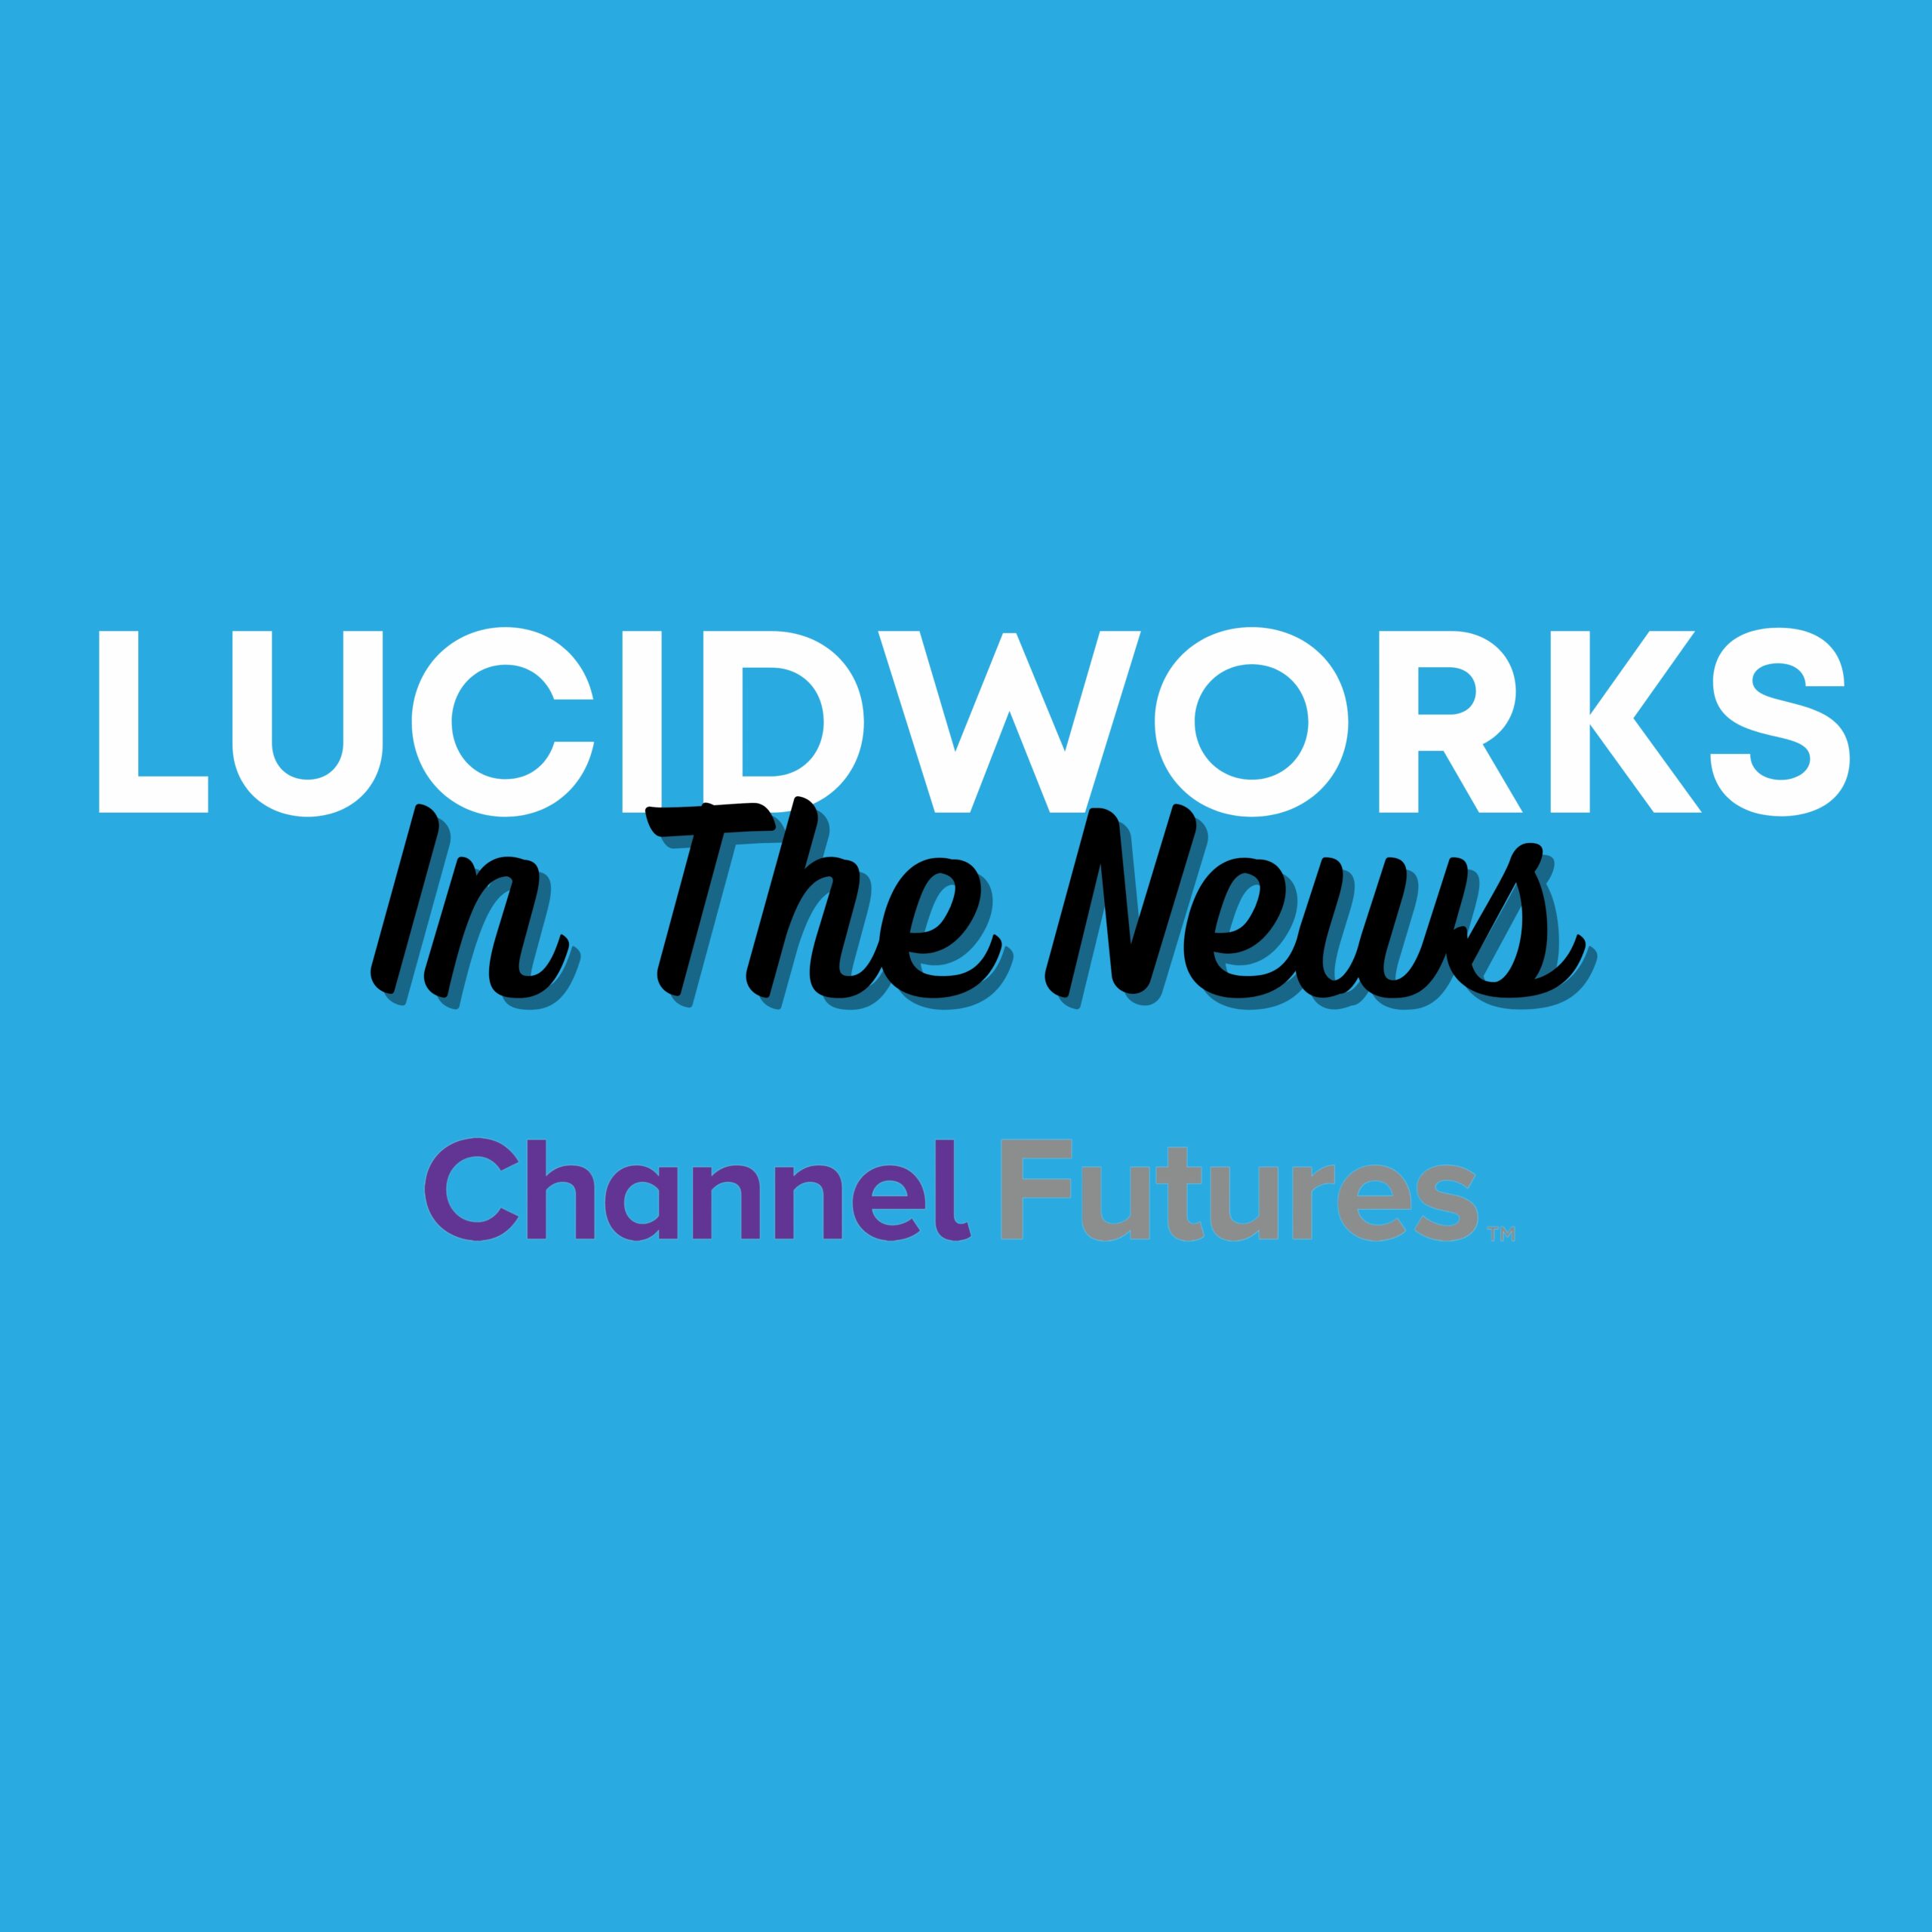 Lucidworks Featured in Channel Futures